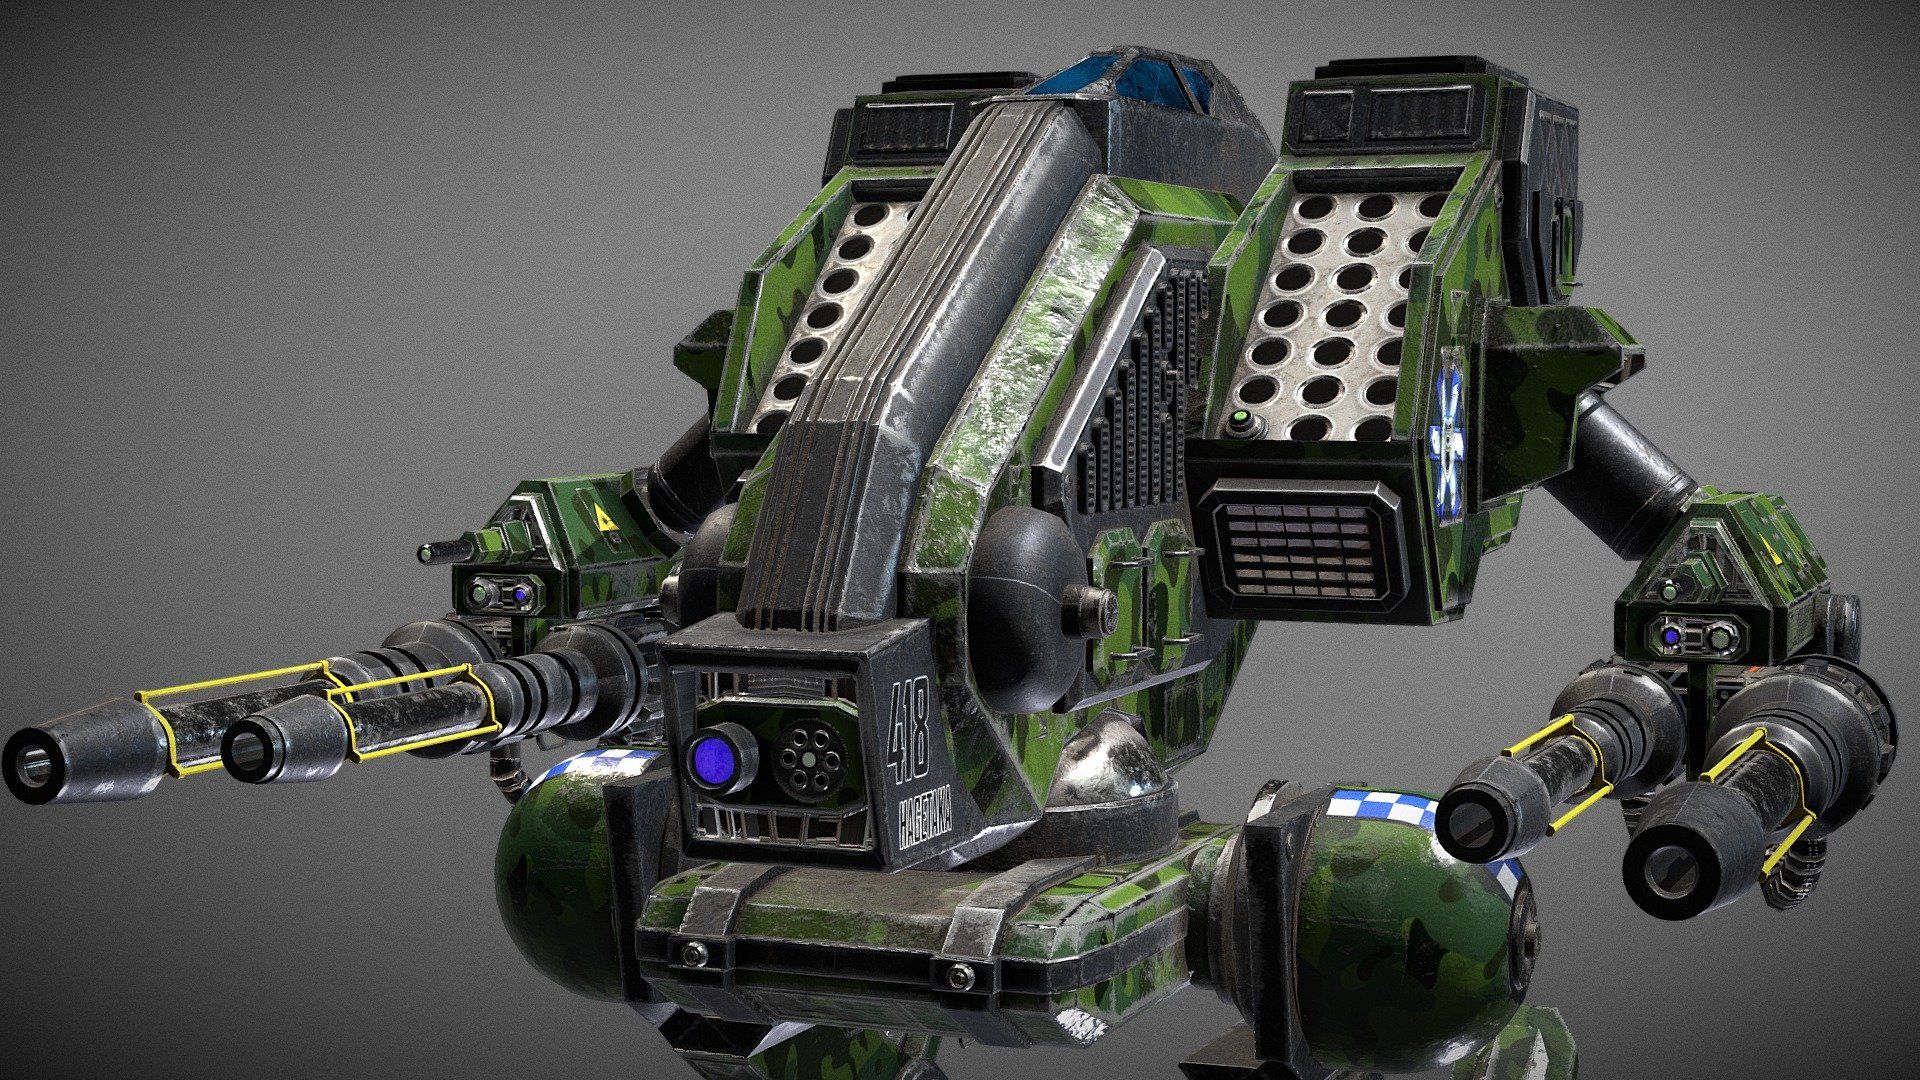 The Vulture / Mad Dog is a heavy Clan Omni Mech used for long-range indirect fire support, introduced in the year 2963. For this livery I took inpsiration from the Clan Ghost Bear Vulture that is on the MechWarrior 2: Mercenaries Expansion Pack cover:


This model was made for a university project. The goal was to bake a high poly onto a normal map with the low poly under 30,000 plygons. form the MechWarrior BattleTech Universe. I made the low and hogh poly models in Maya, then added detail to the high poly in Zbrush before baking that onto a normal map in Substance Painter.

I did not make the clan logos. All credit for those goes to Punakettu who is a fantastic artist. You can find his work at https://punakettu.deviantart.com/
His work played a role in inspiring me to make my own Mech for the MechWarrior from the BattleTech Universe 3d model